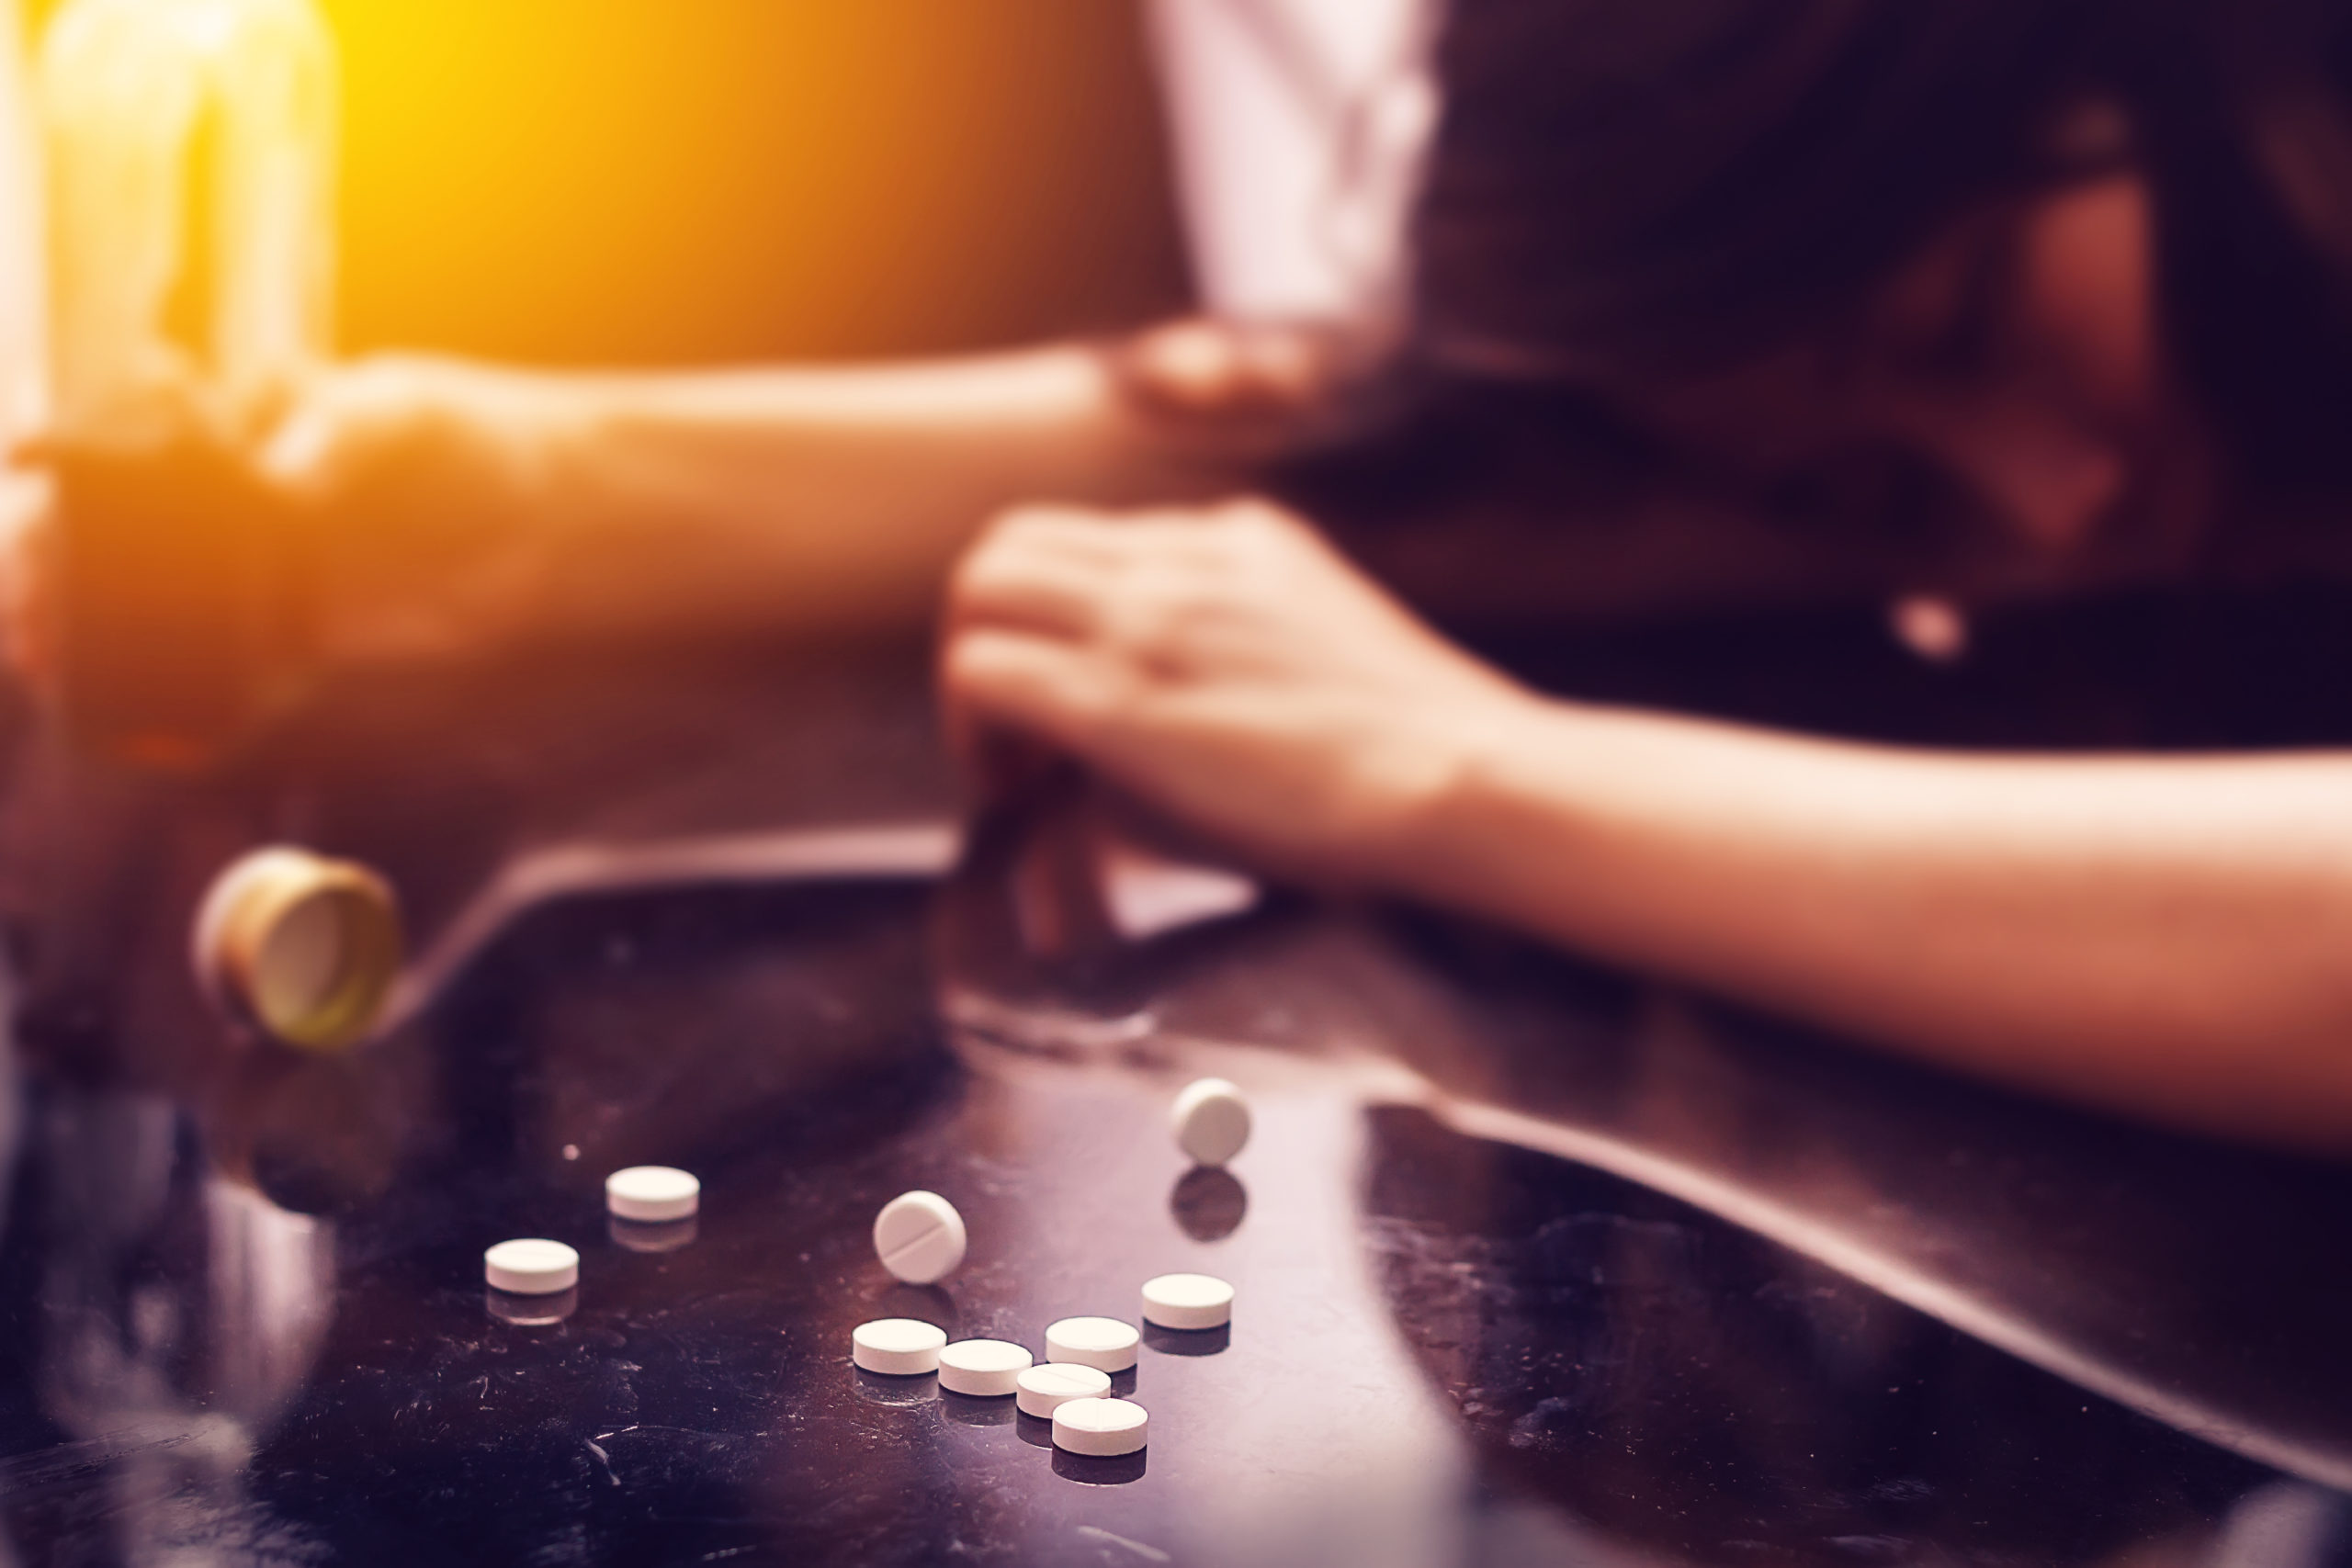 Arms on table, there are opioid pills scattered across the table